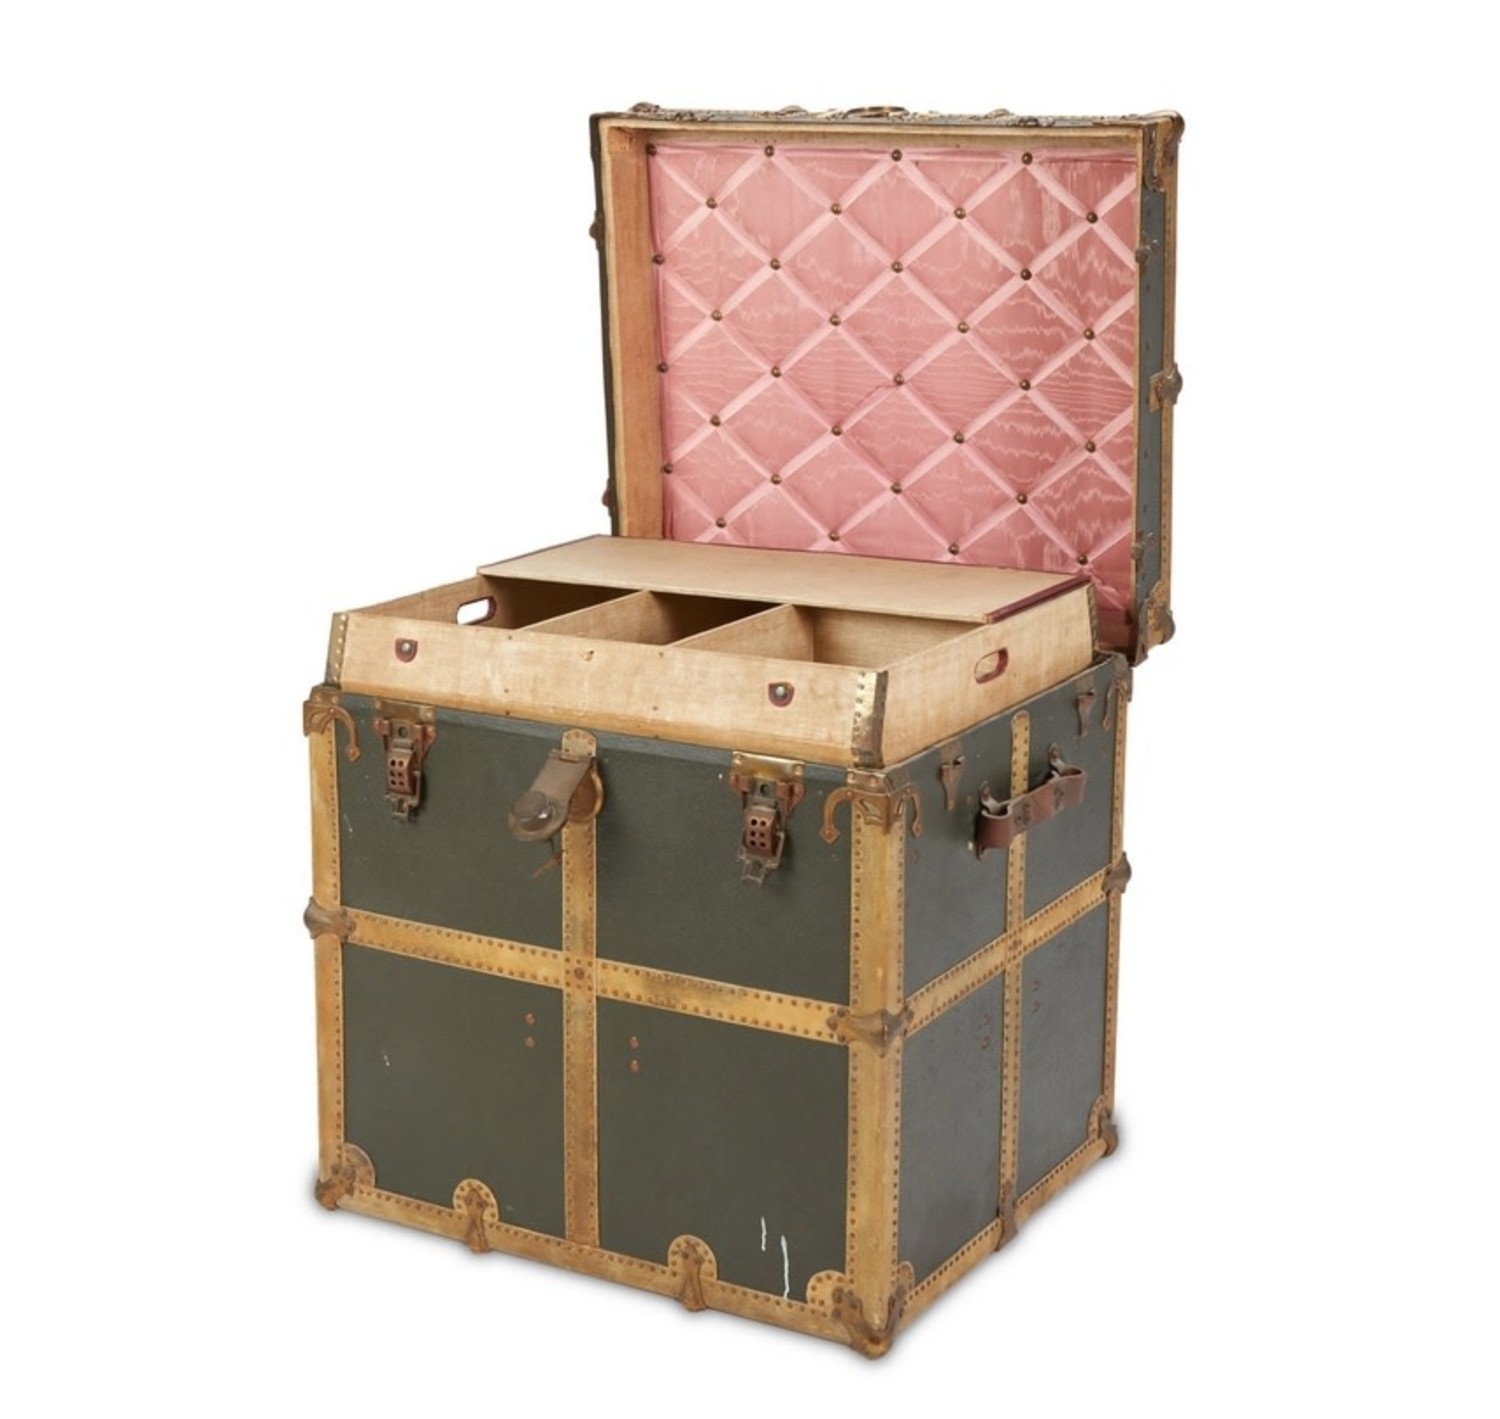 Antique Steamer Trunk by F Endebrock Trunk Co.